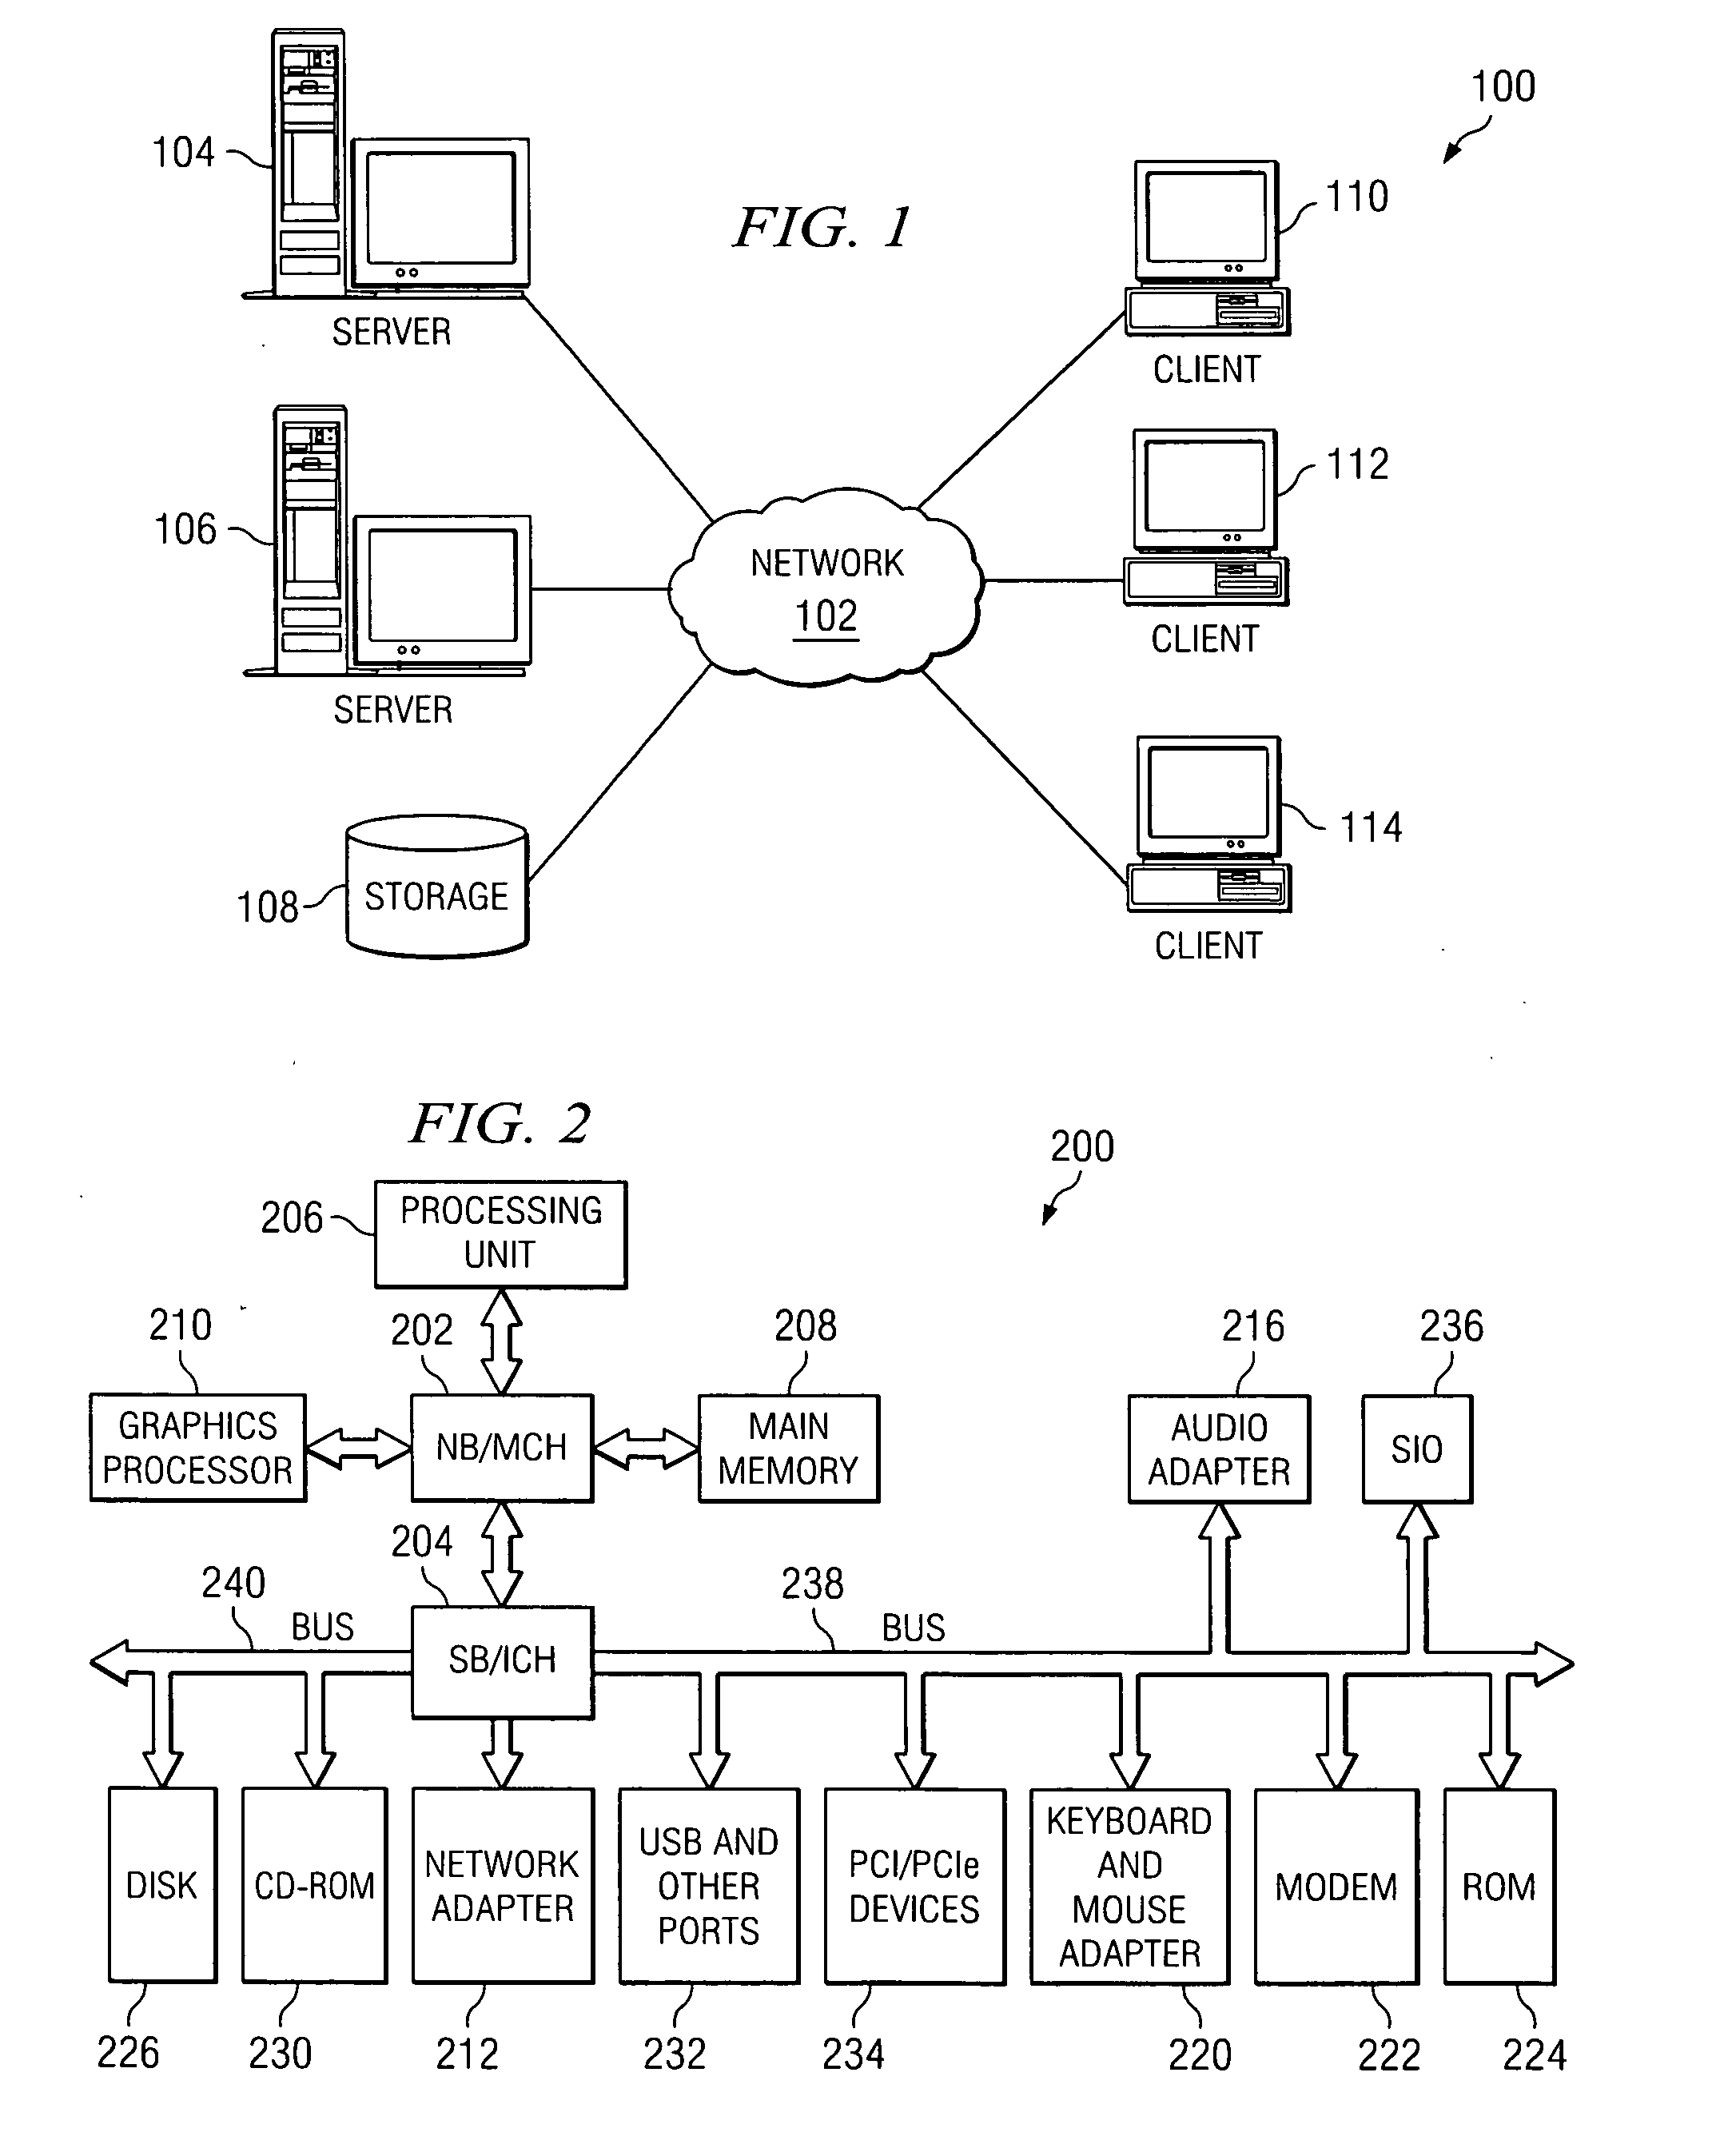 Generation of software thermal profiles executed on a set of processors using thermal sampling